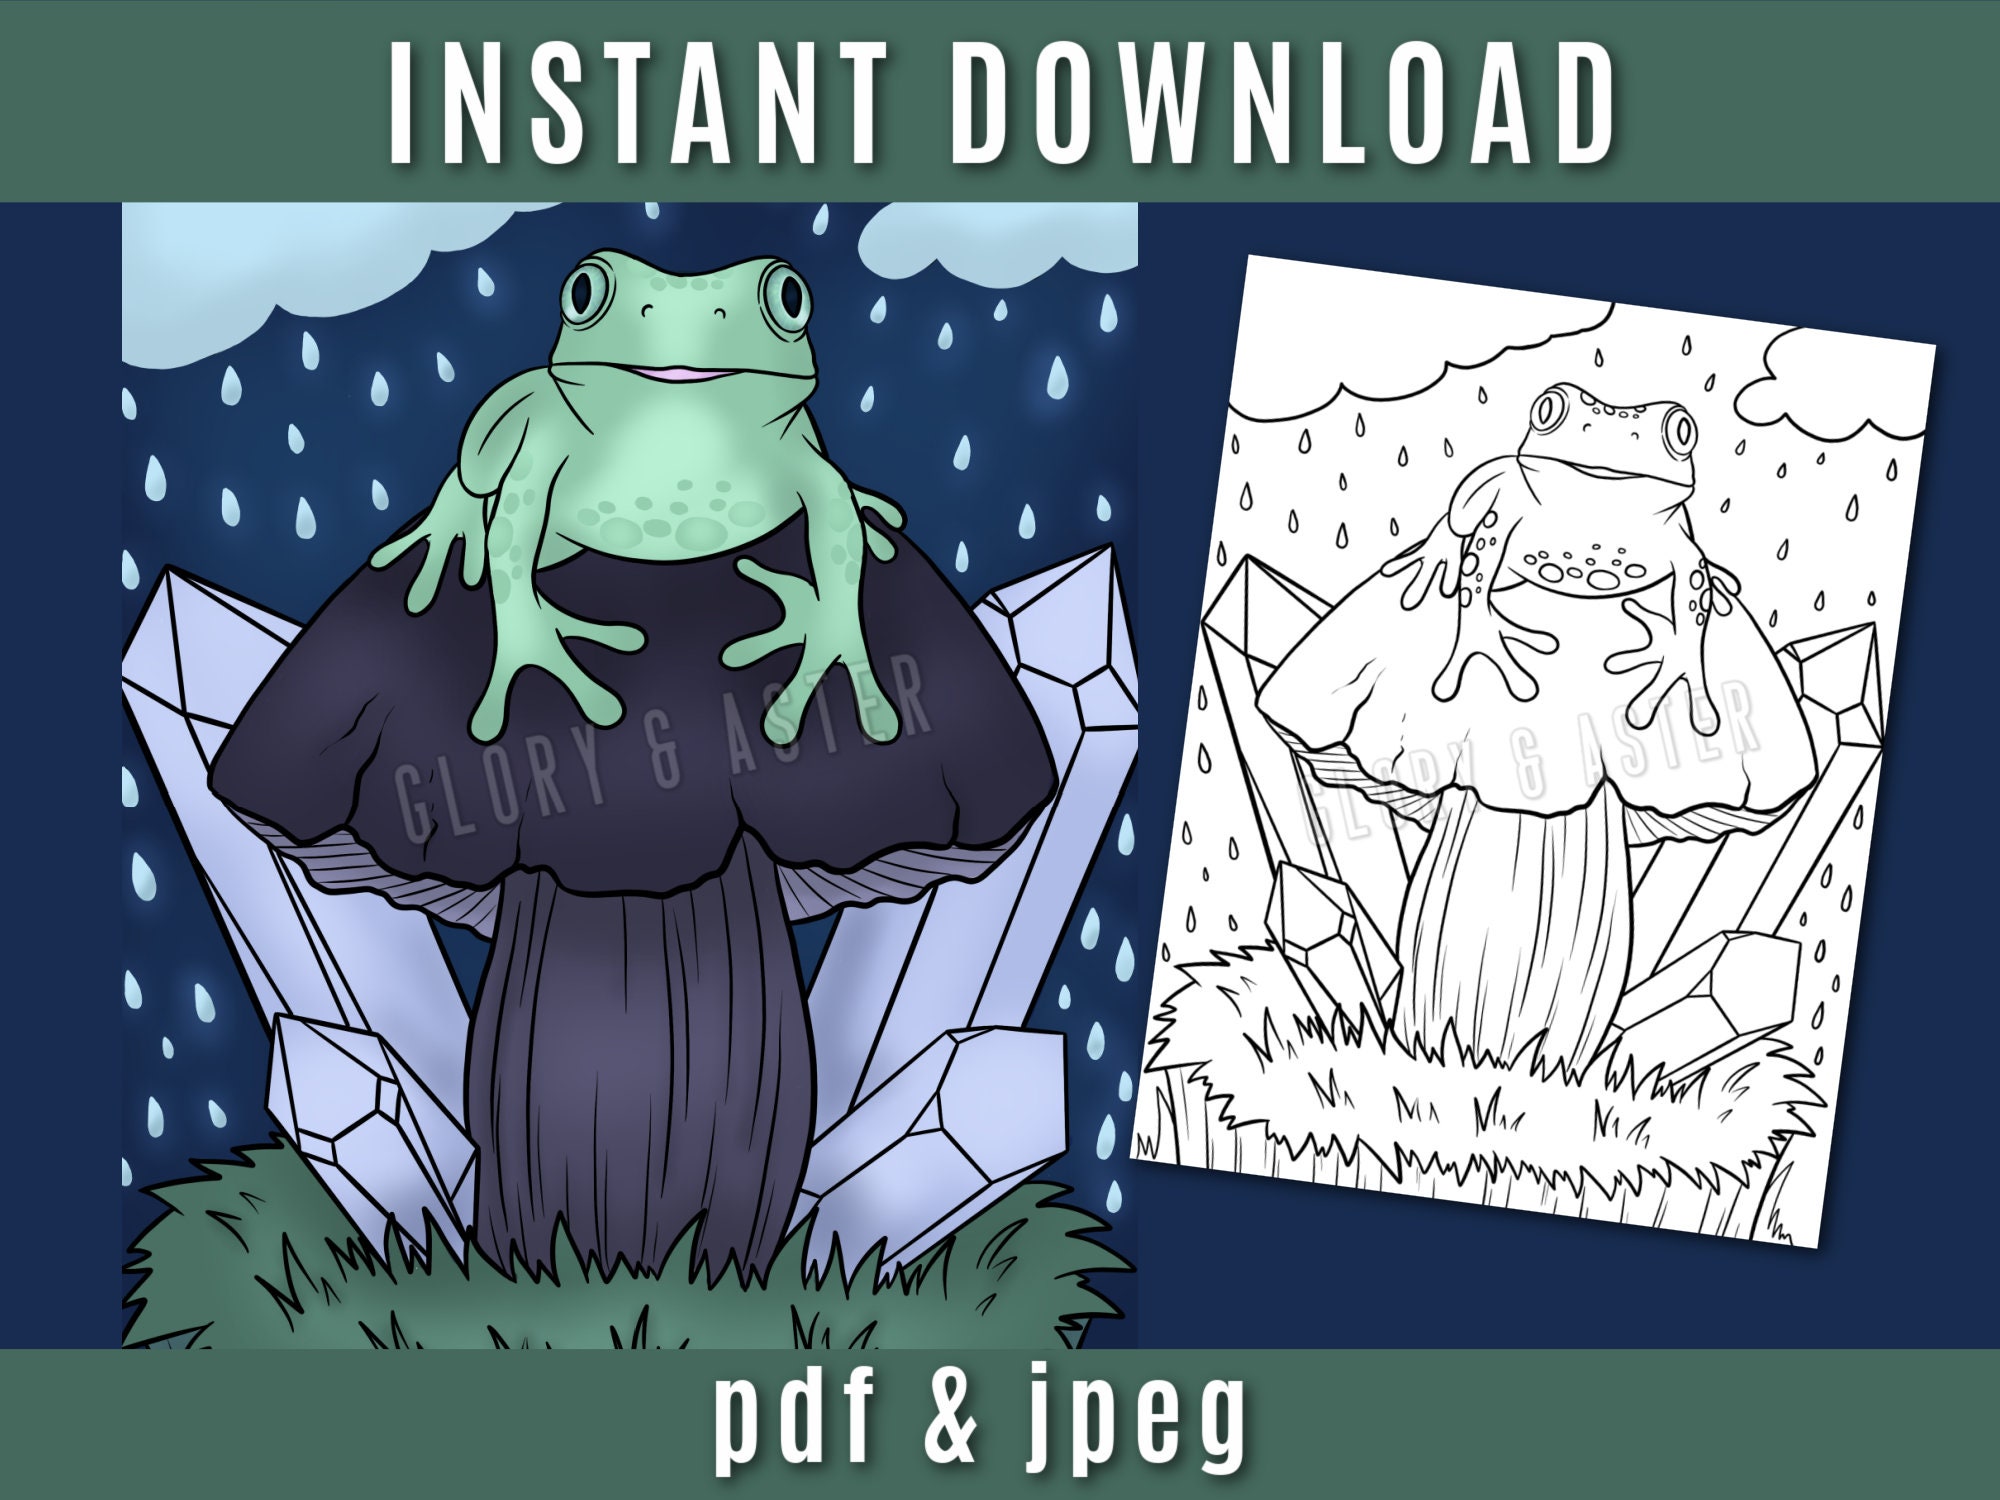 Frog Mushroom Coloring Page   Printable Coloring Page   Instant Download    PDF   Adult   Magical   Cute   Fantasy   Mystical   Toad